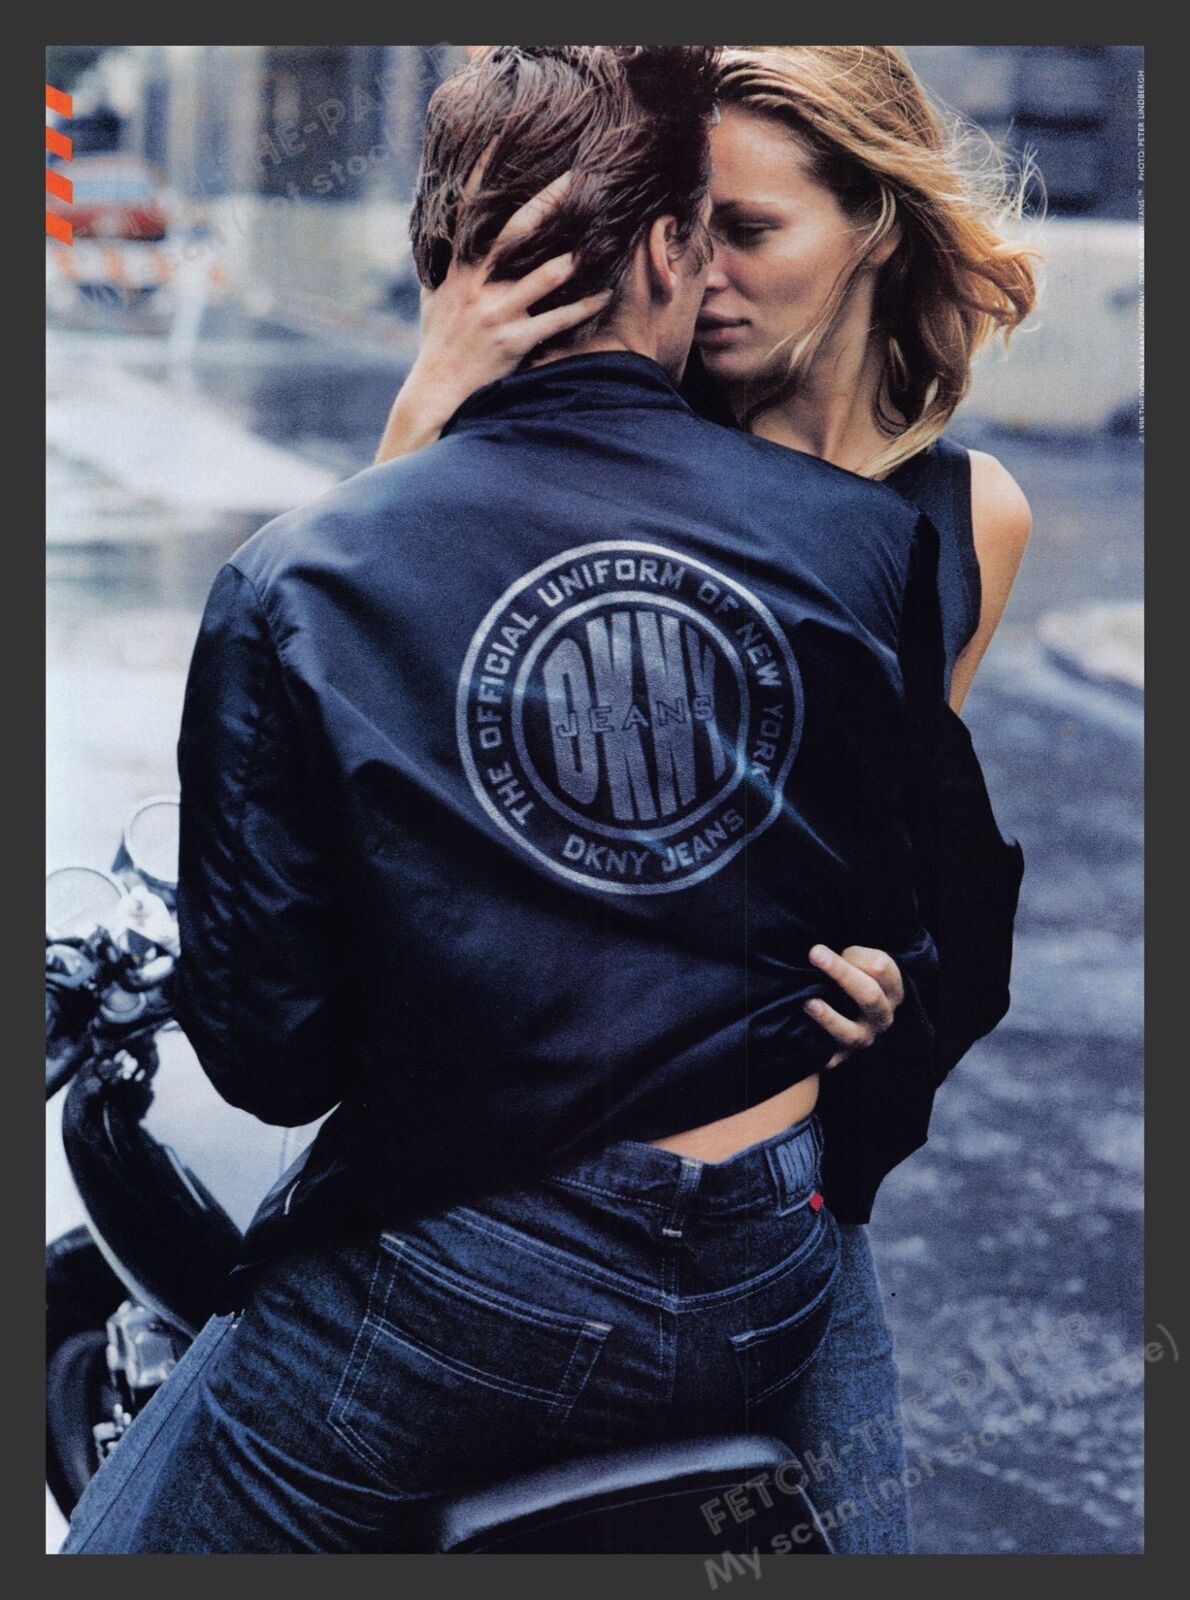 DKNY Jeans 1990s Print Advertisement Ad 1998 Motorcycle Esther Canadas